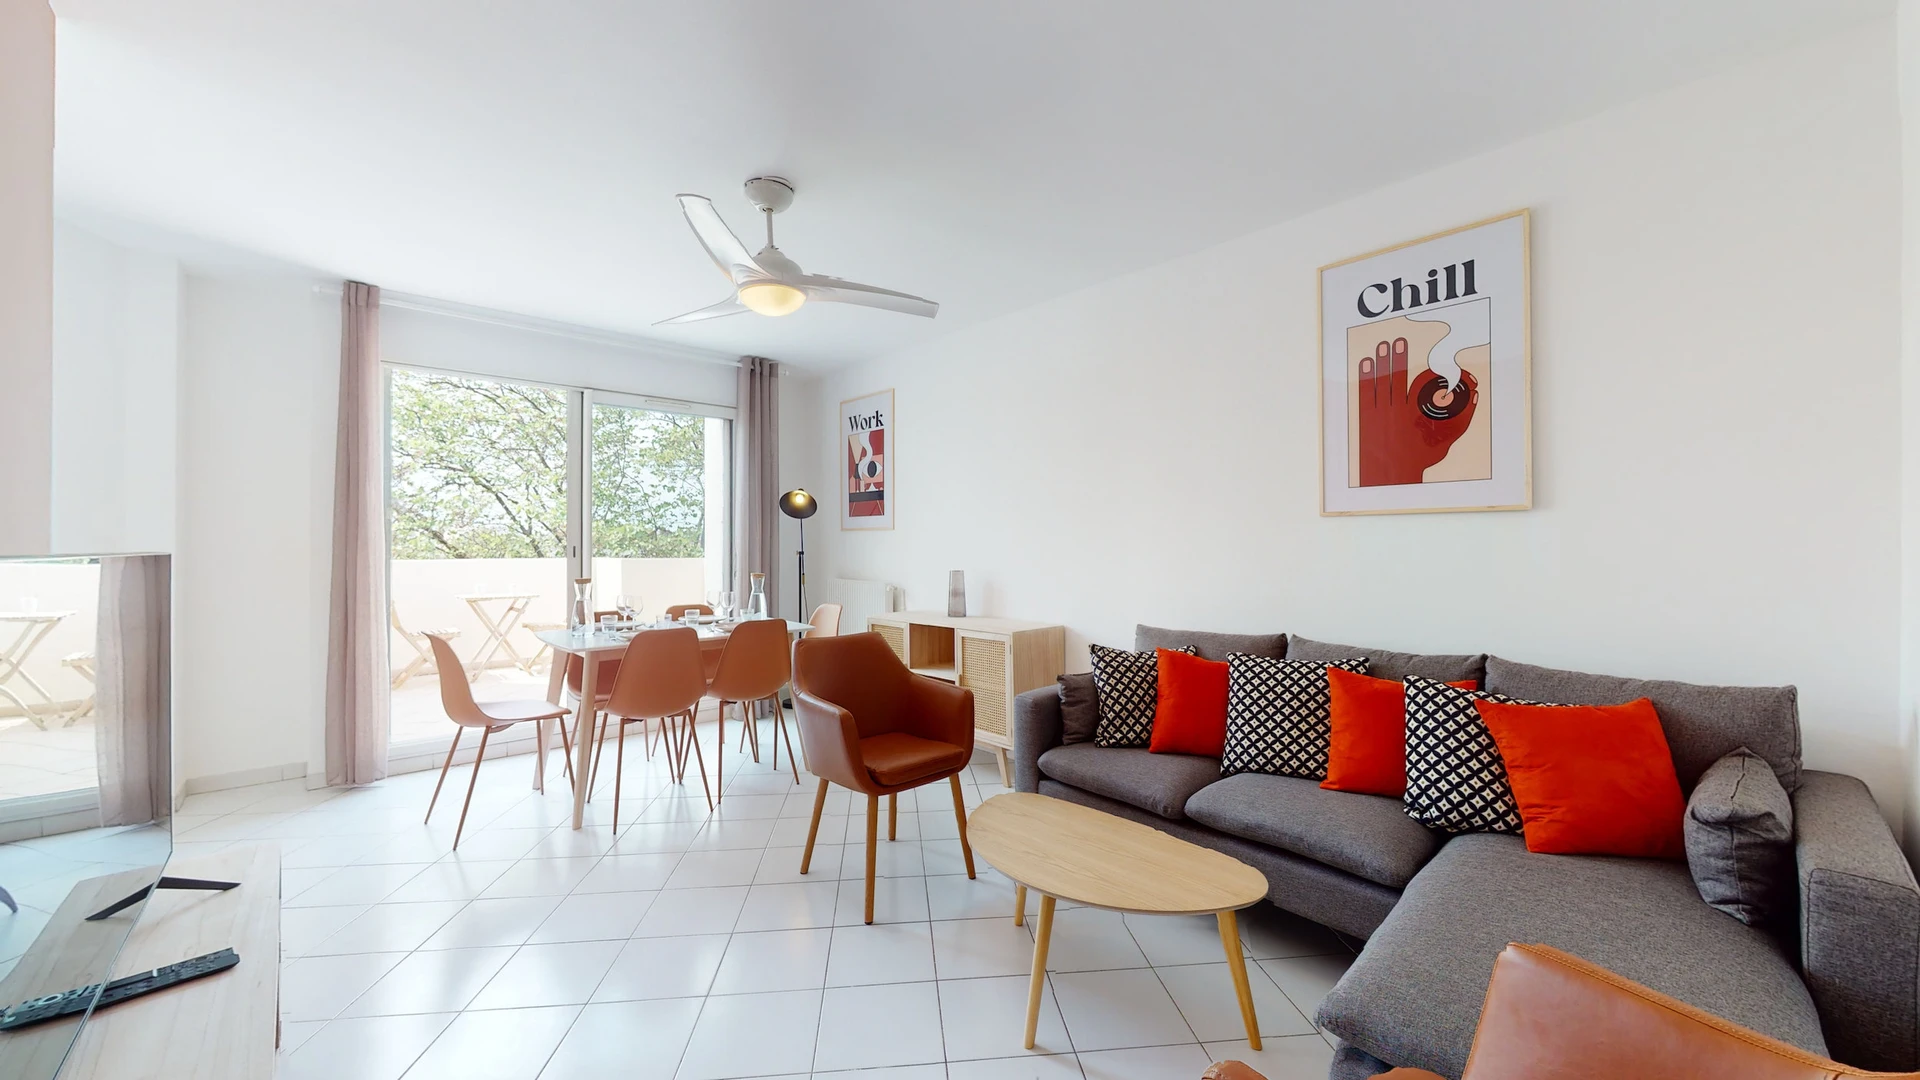 Renting rooms by the month in Montpellier